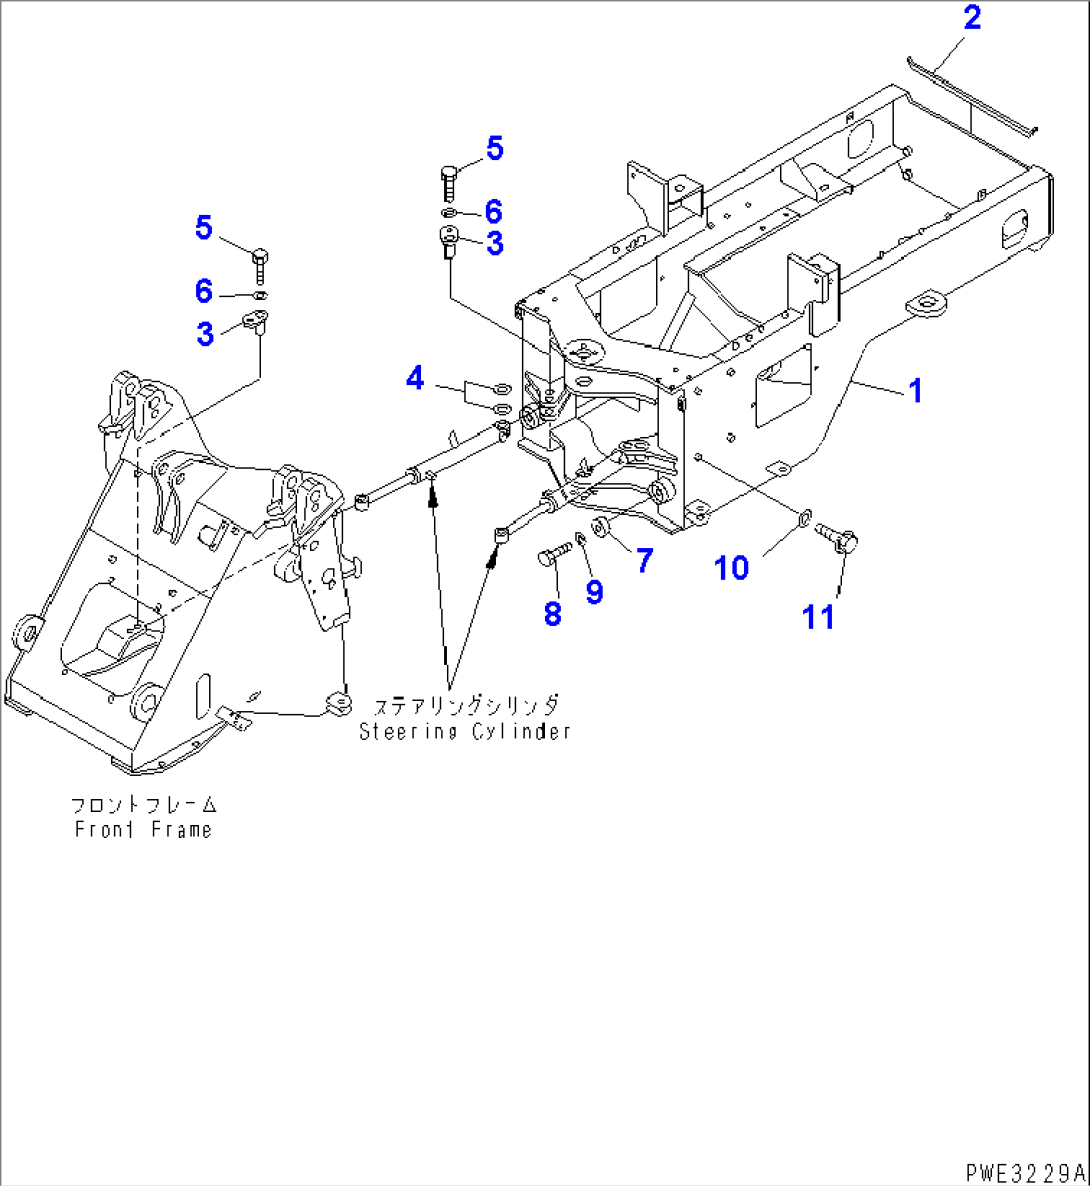 REAR FRAME (WITH MULTI COUPLER)